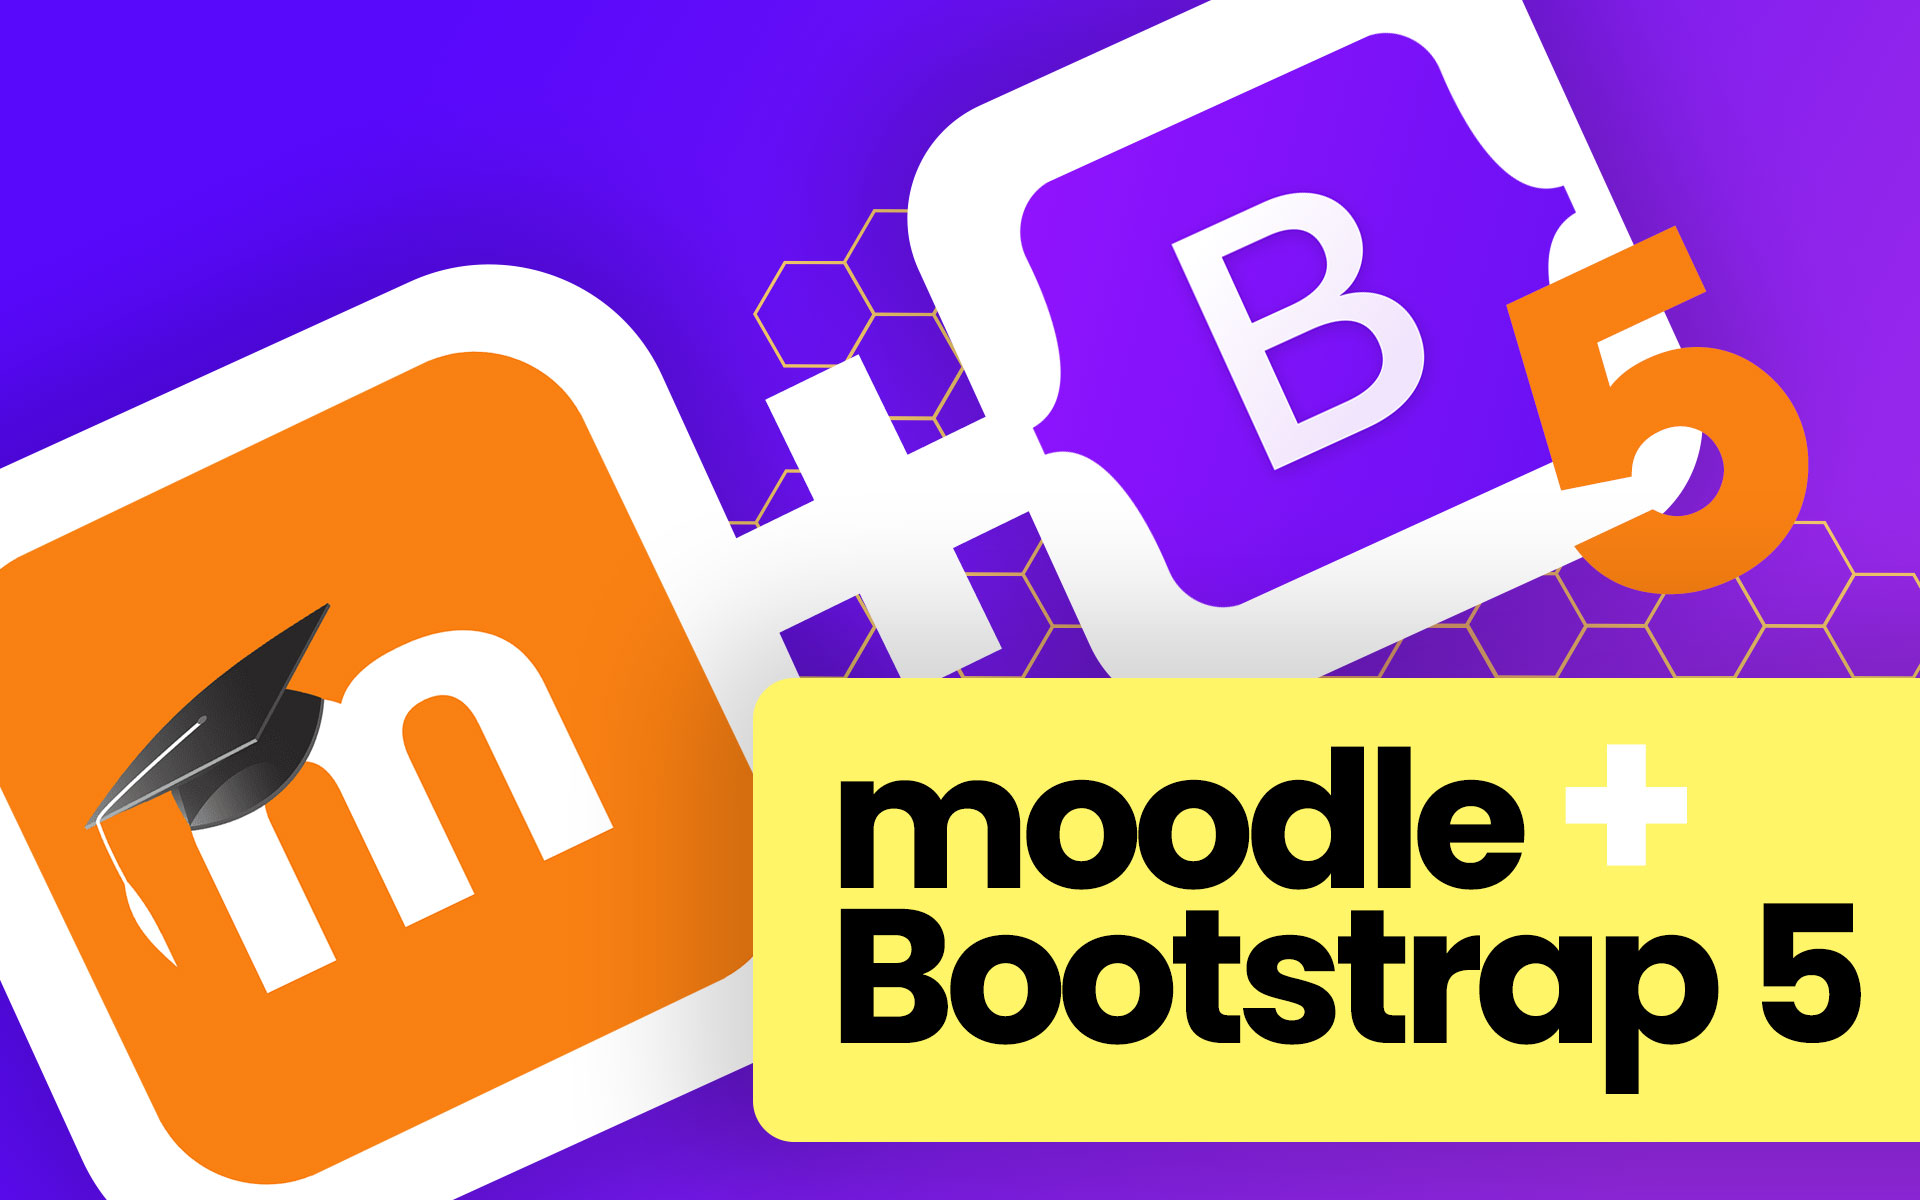 Moodle migration to Bootstrap 5 has already begun. While it may take some time, I tried updating Boost SCSS to Bootstrap 5 but not the entire theme.